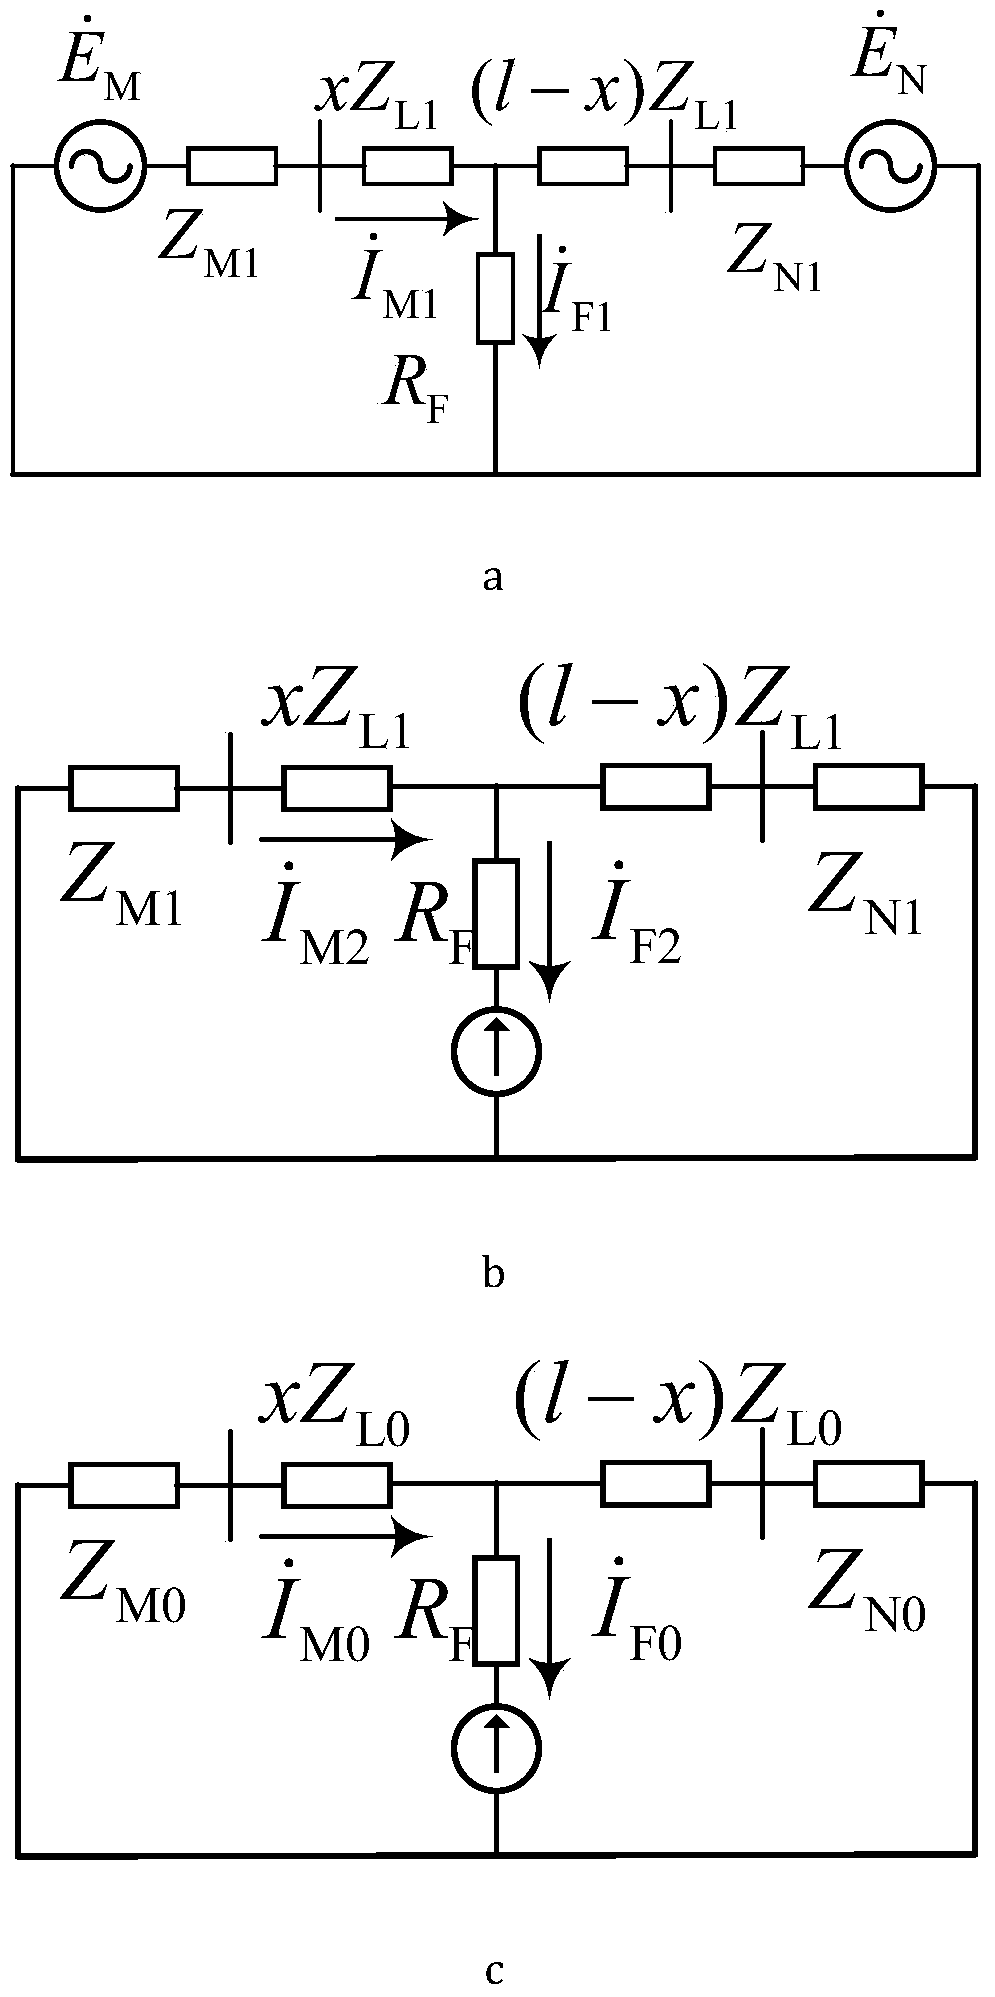 Single-ended fault location method for transmission lines based on sequence component relationship